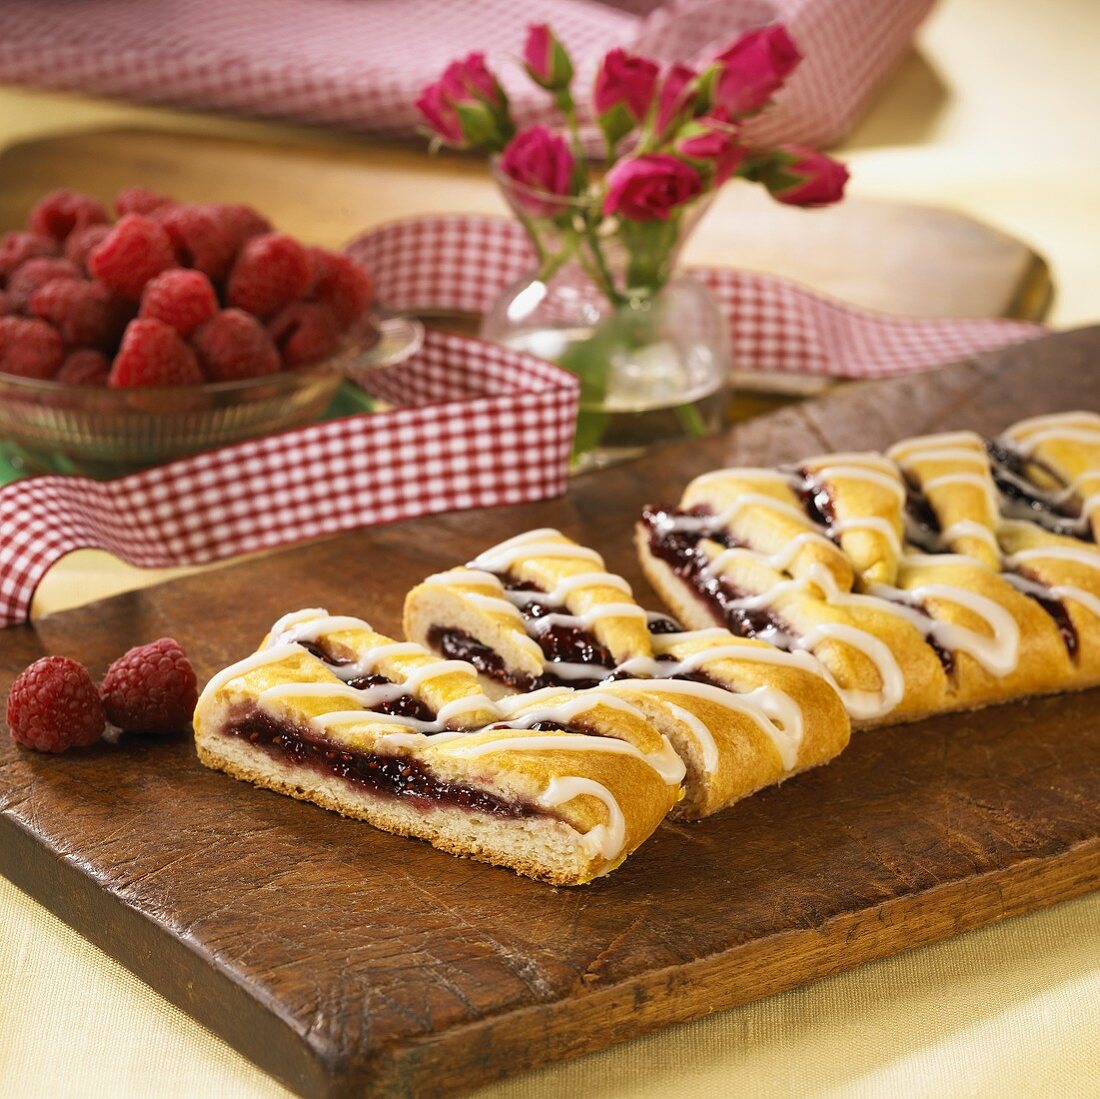 Partially Sliced Raspberry Strudel on a Wooden Board